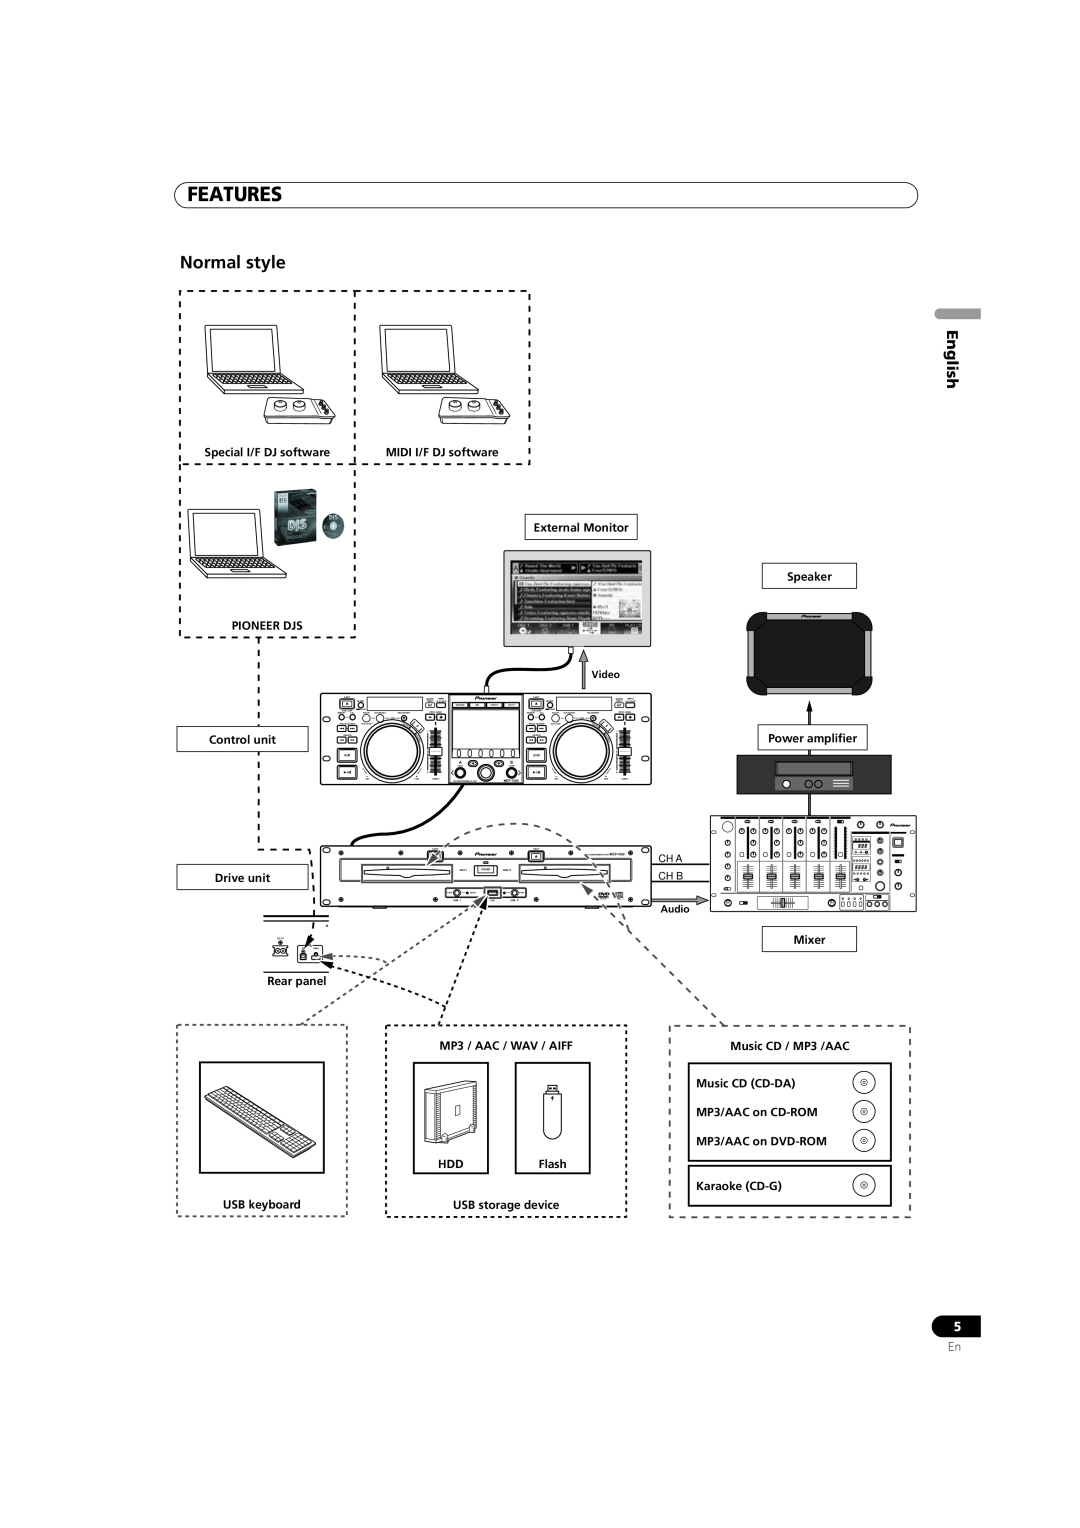 Pioneer MEP-7000 operating instructions Normal style, Features, English 